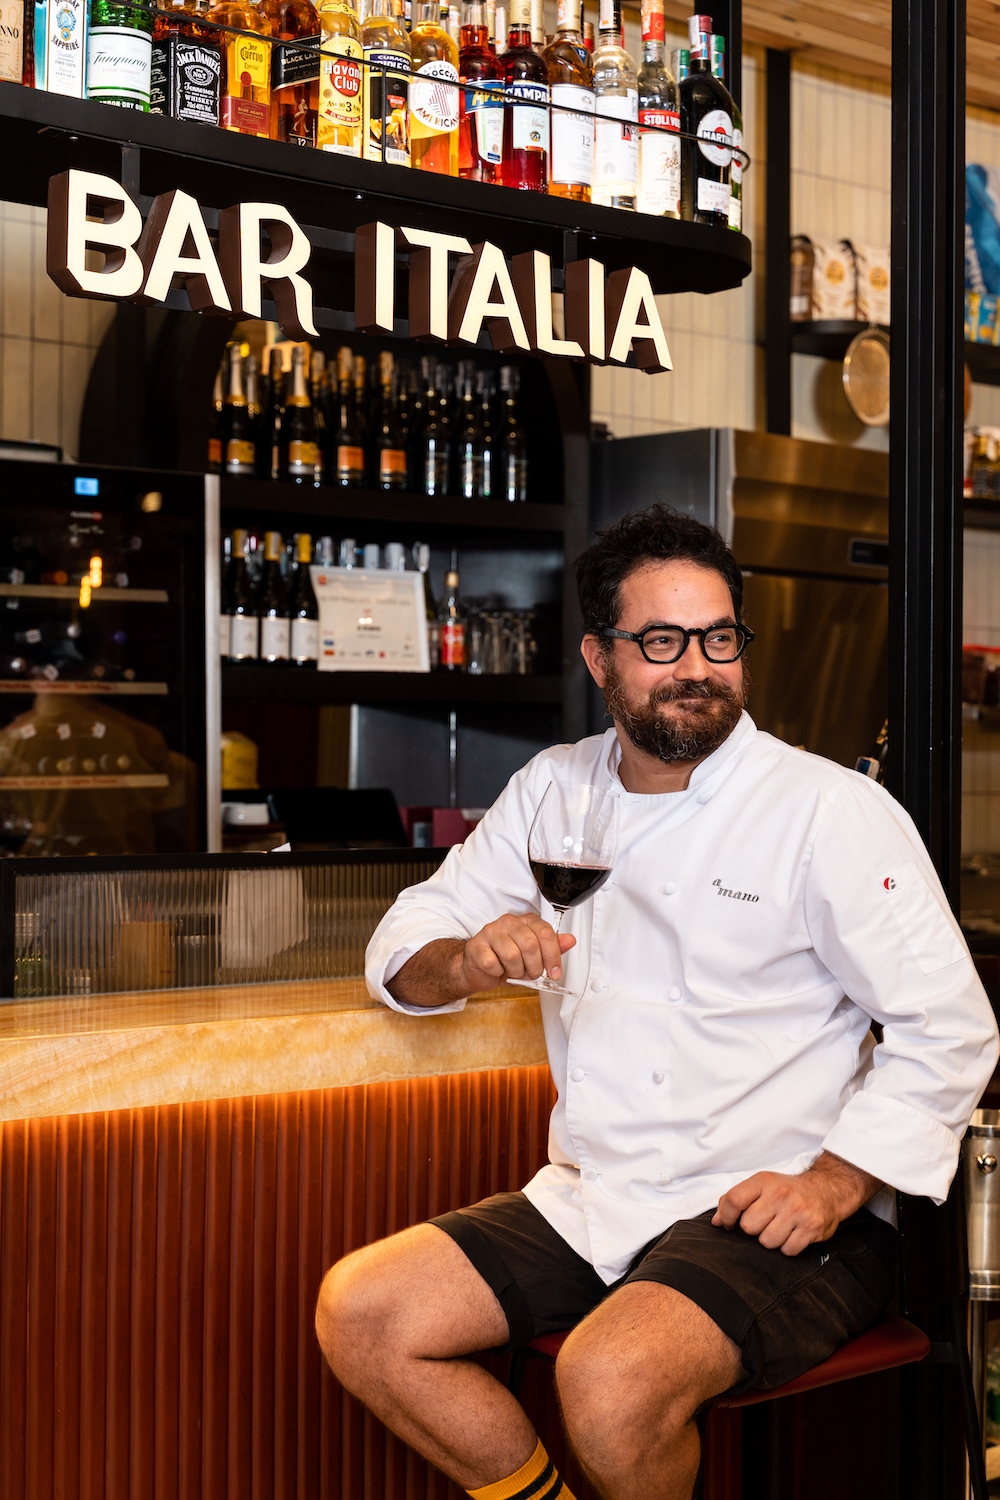 Acclaimed Italian chef Luciano Monosilio is widely regarded as the "King of Carbonara"